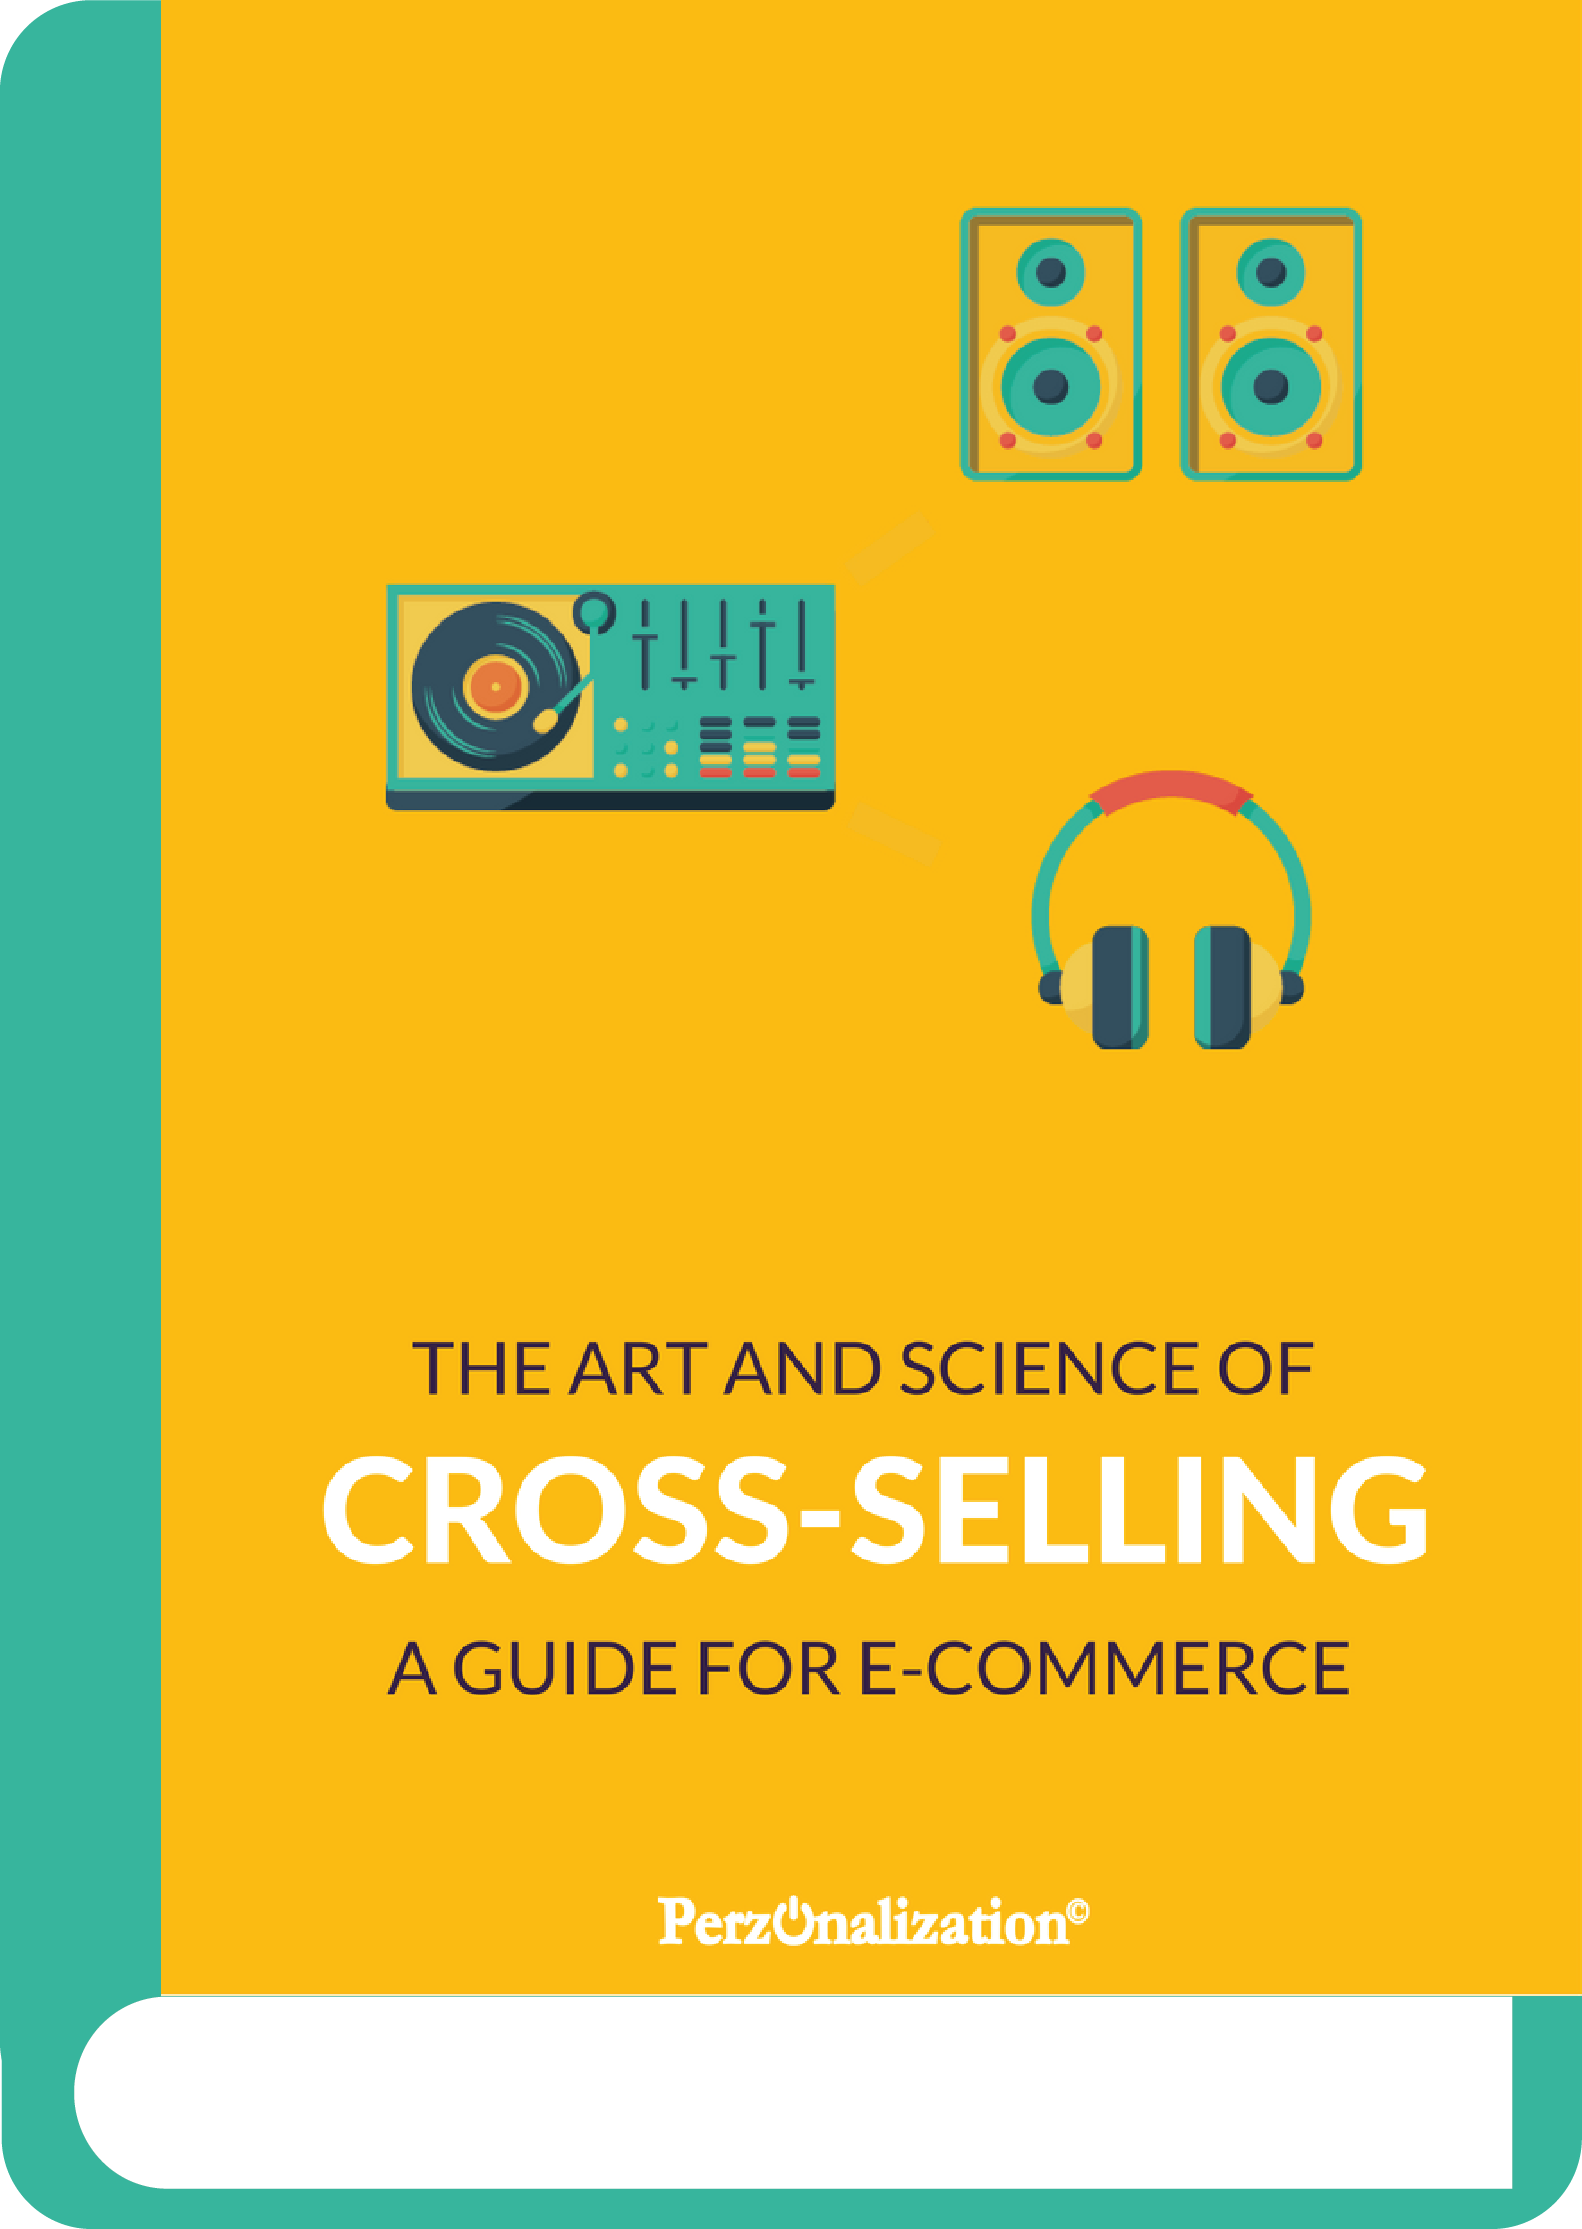 For online store owners or the eCommerce executives, cross selling is both an art and a science. In this eBook you’re going to discover the great online cross-selling techniques.